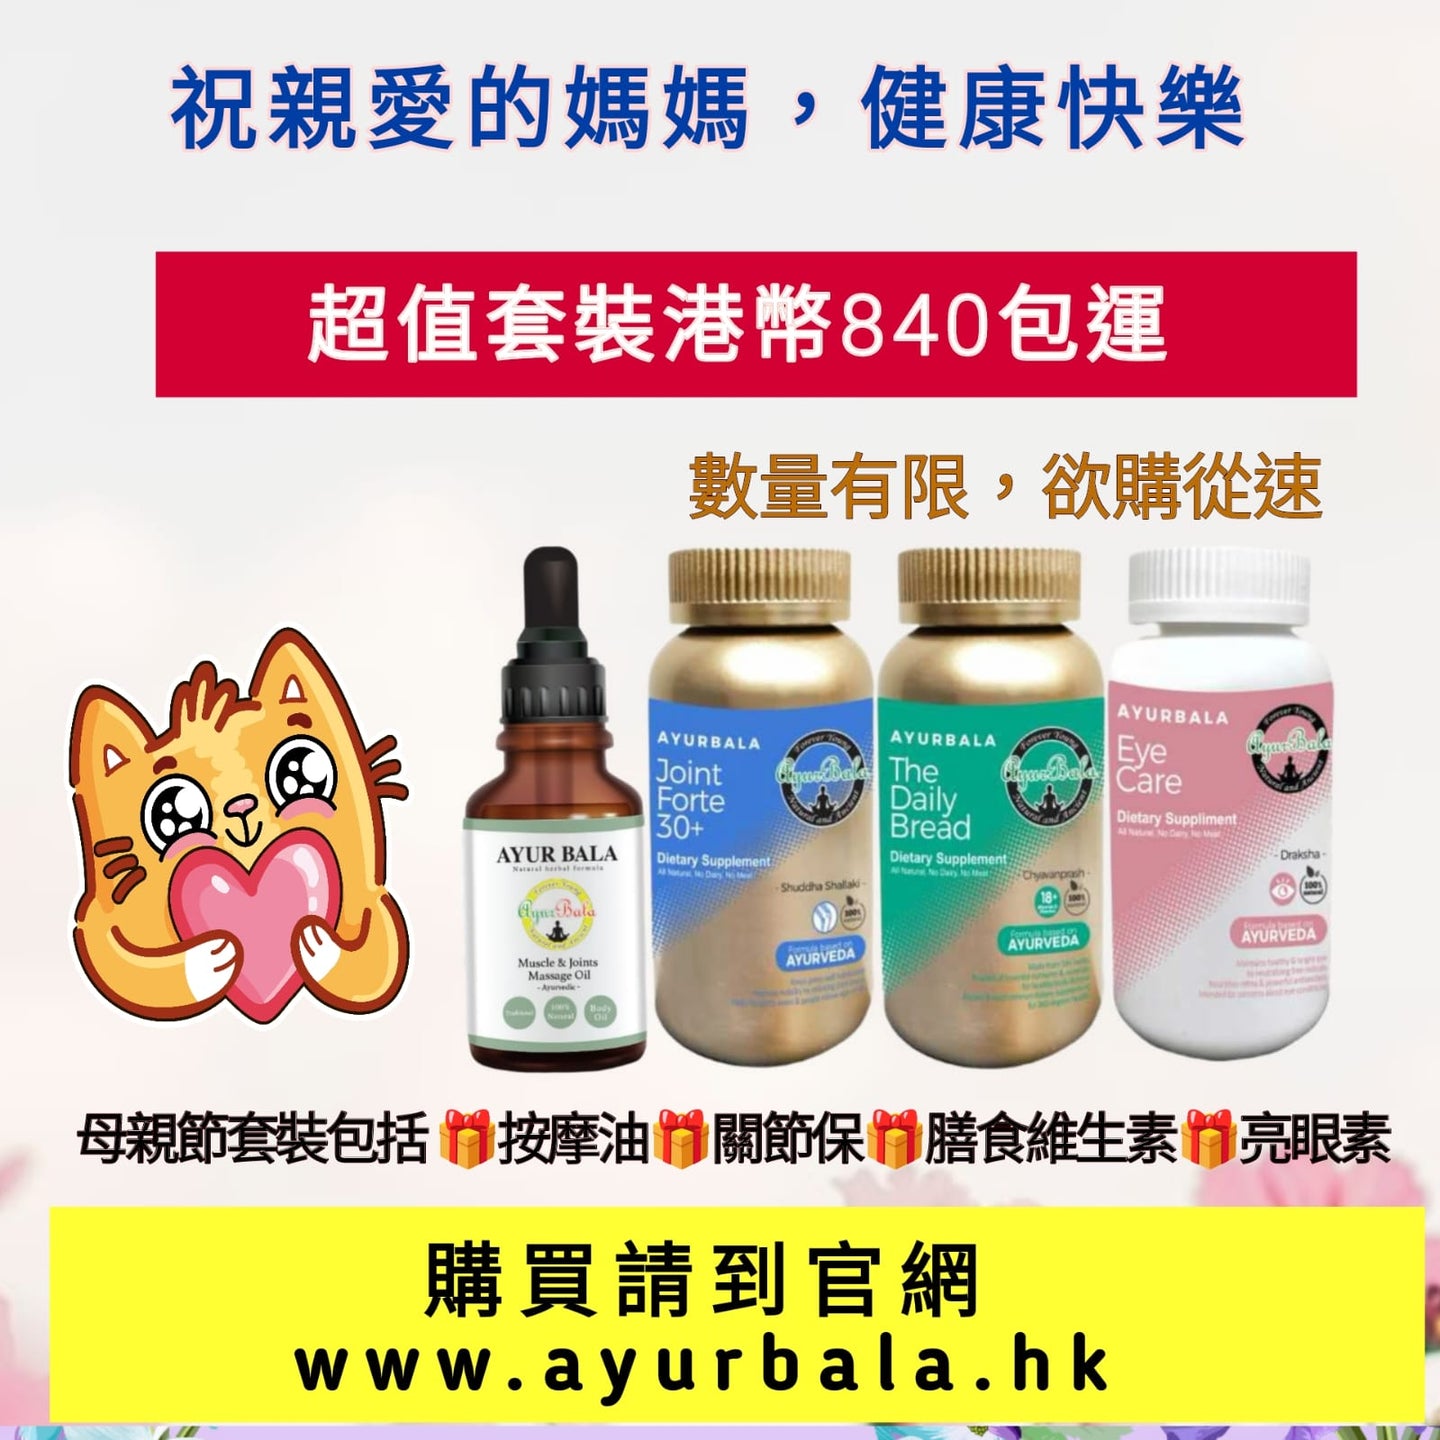 Mother's Day Gift Set (1 Massage Oil, 1 Joint Forte, 1 Daily Bread, 1 Eye Care) ***Special Price HKD 840.00 inclusive of free shipment in HK